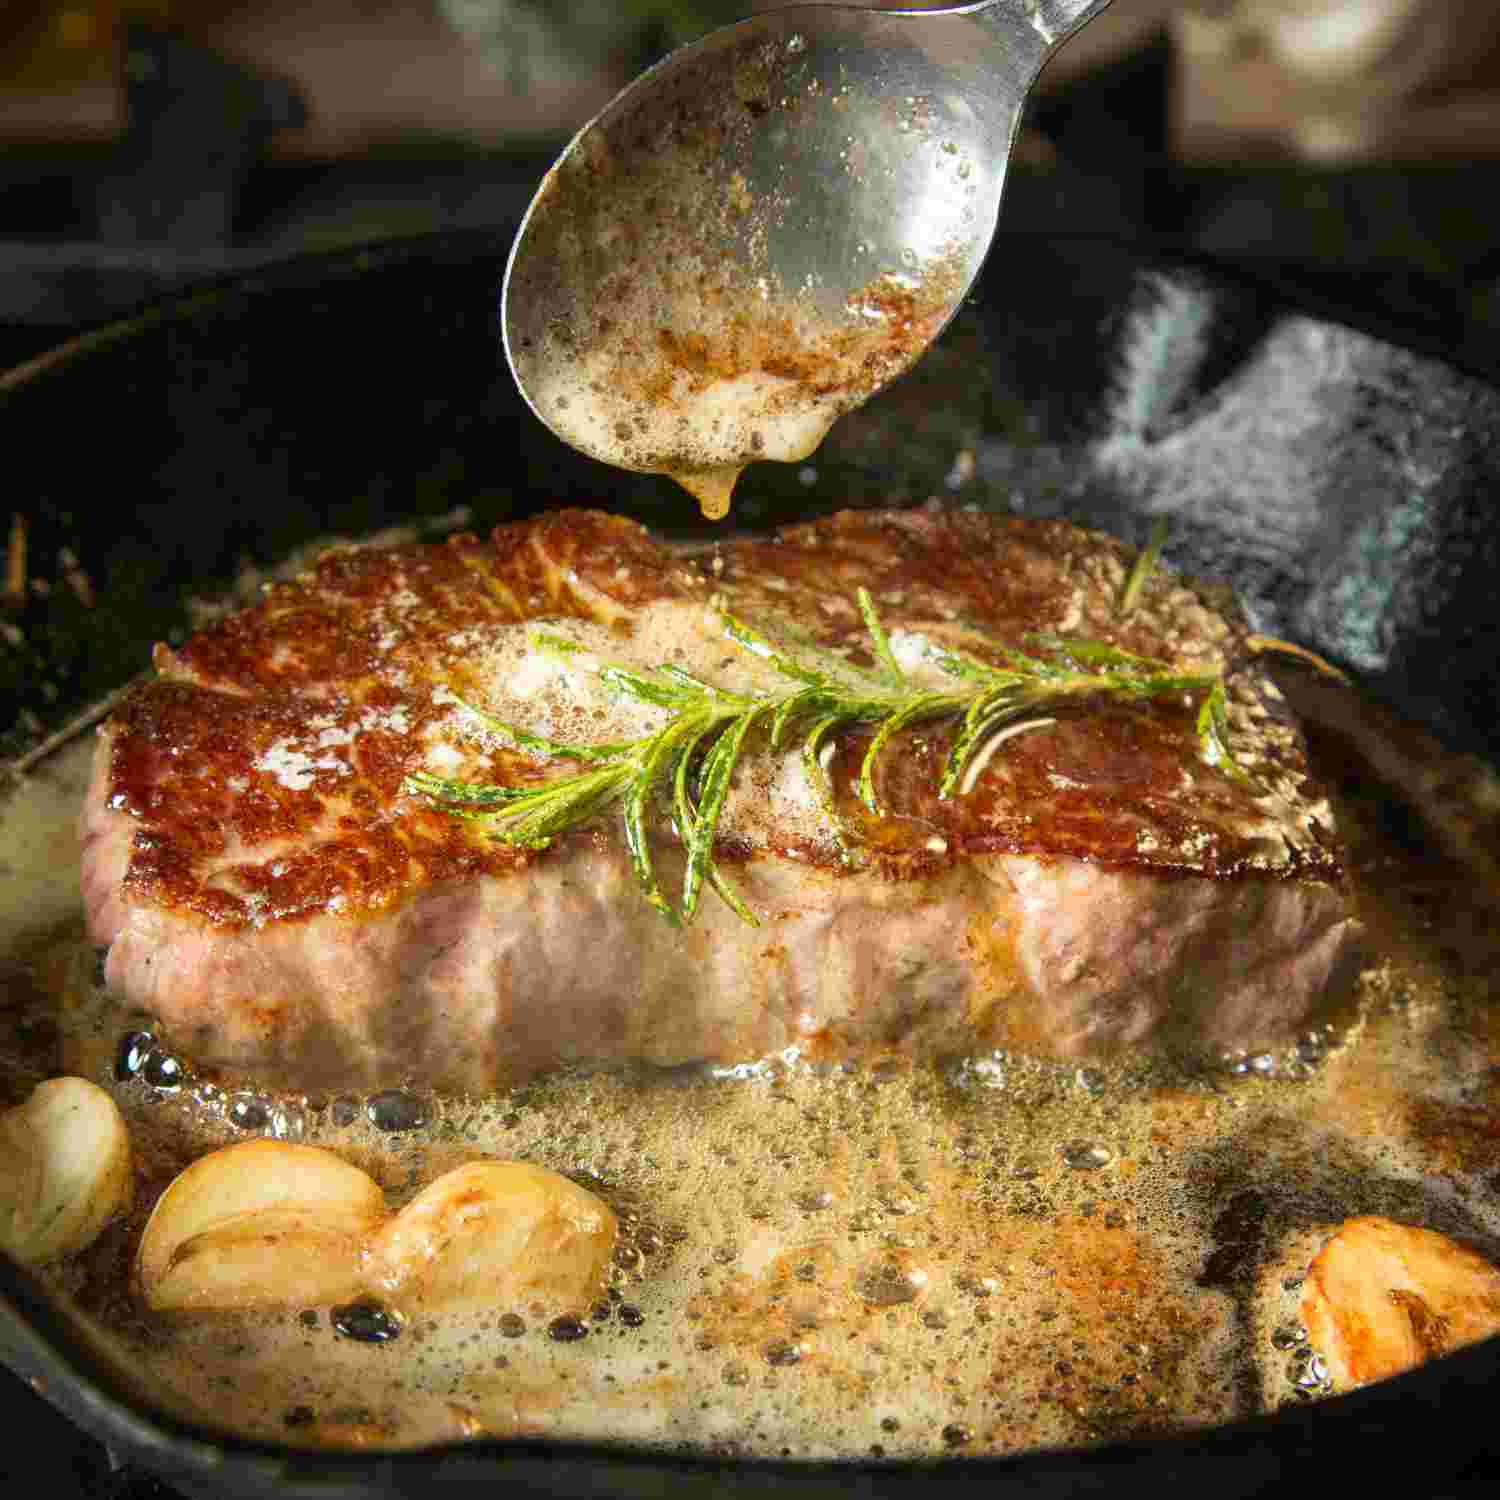 A photo of a juicy steak with fresh rosemary garnish